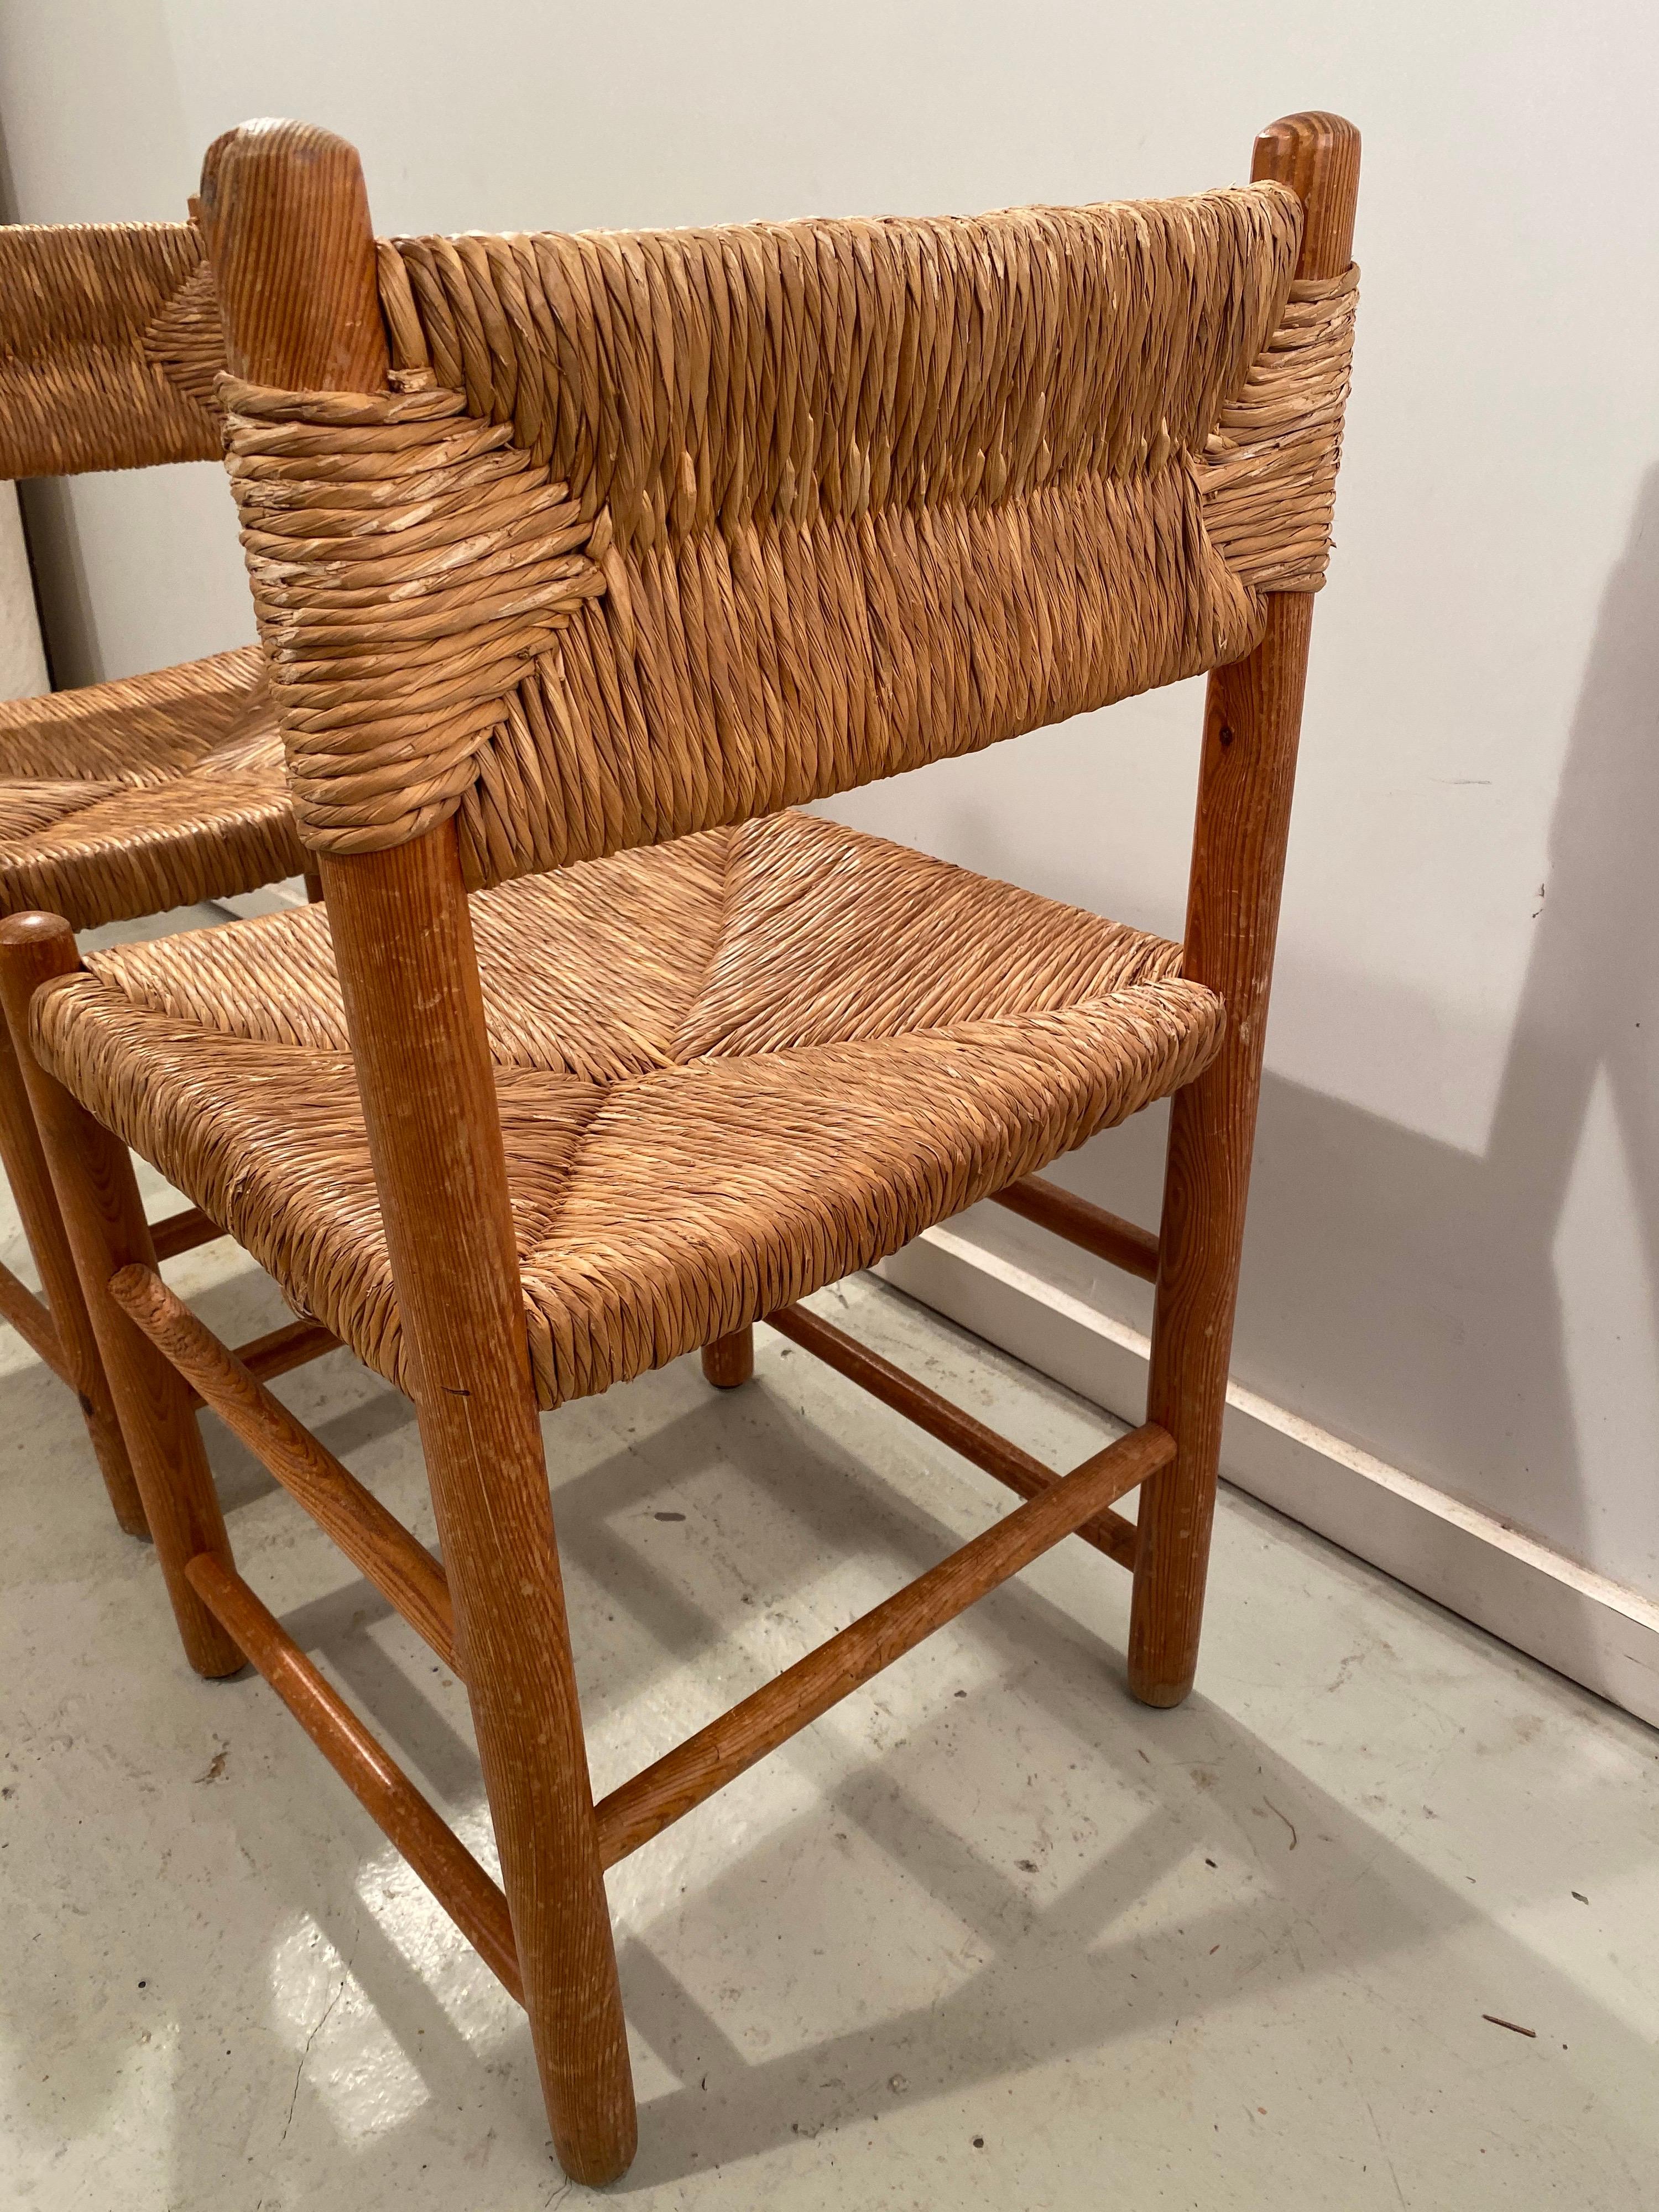 Pair of Wicker Dordogne Chairs by Charlotte Perriand for Sentou, 1950s For Sale 3